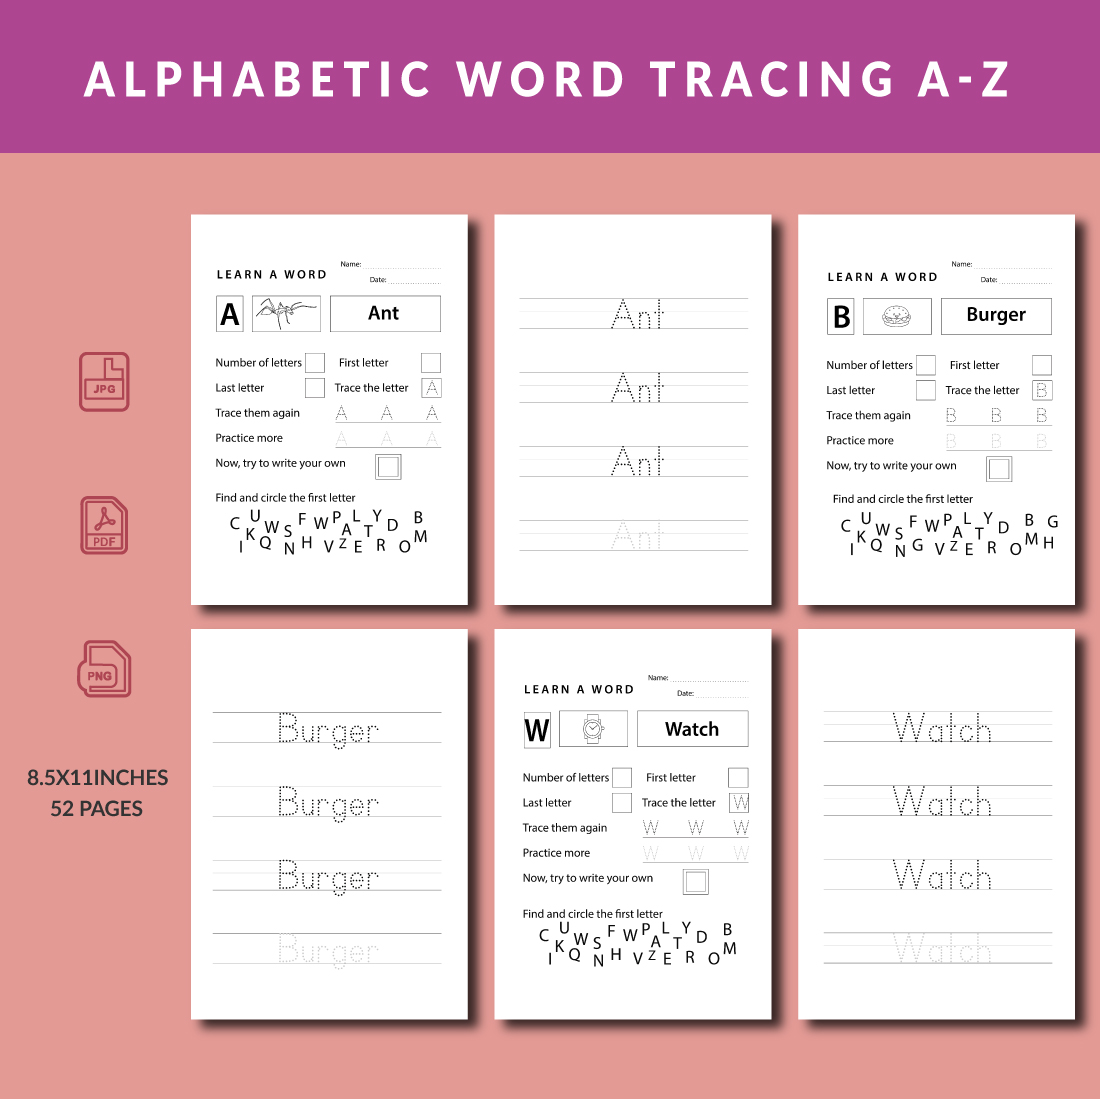 Alphabetic Word Tracing A-Z For Kids main cover.